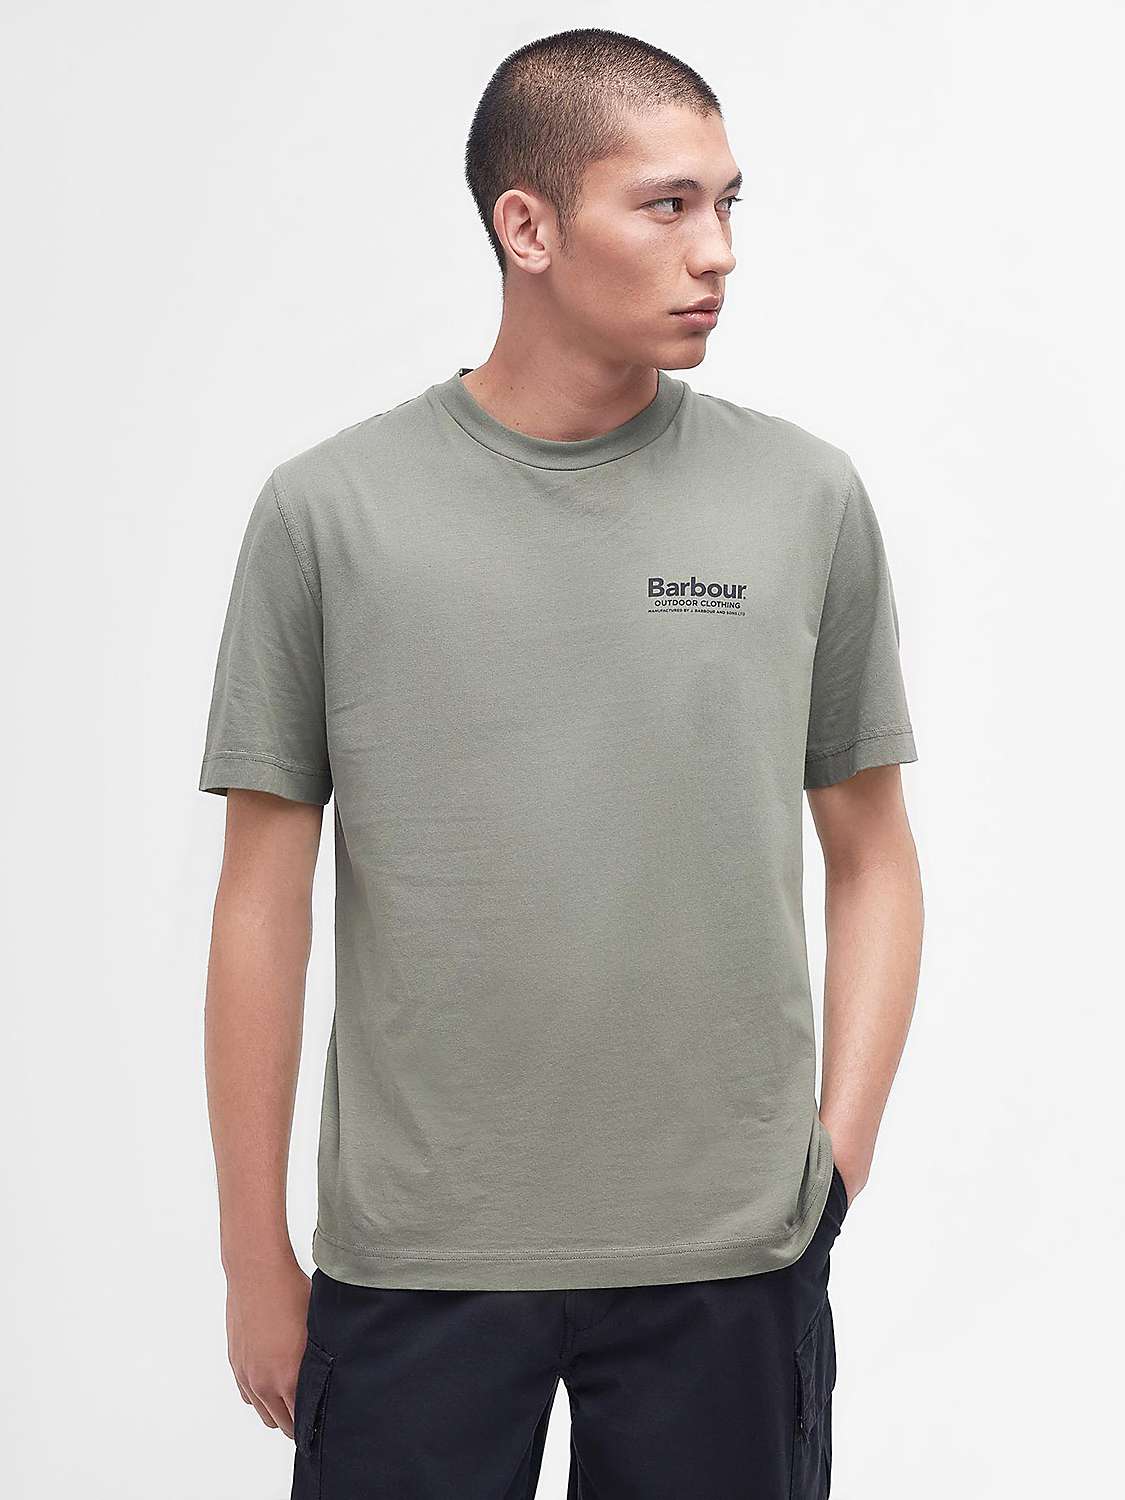 Barbour Catterick T-Shirt, Dusty Olive at John Lewis & Partners